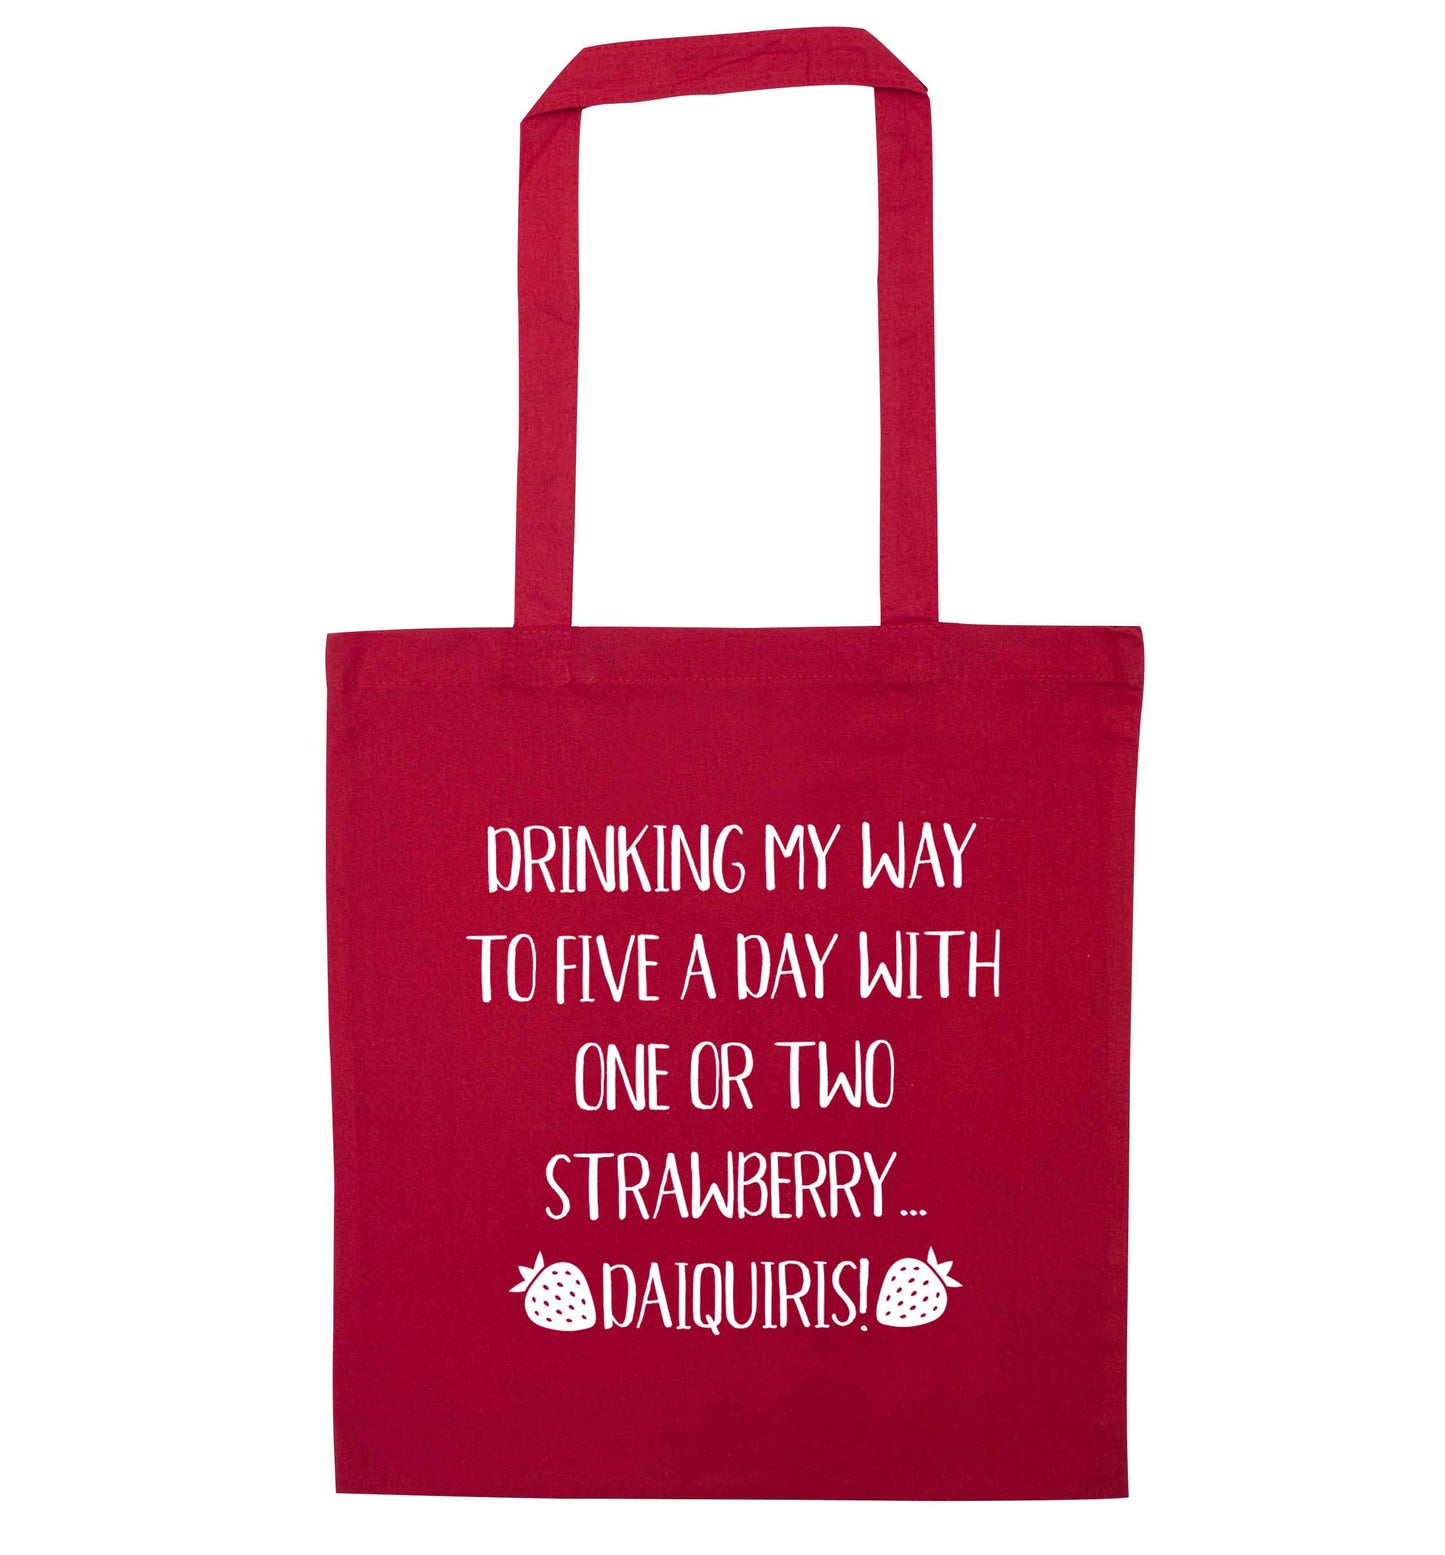 Drinking my way to five a day with one or two straberry daiquiris red tote bag